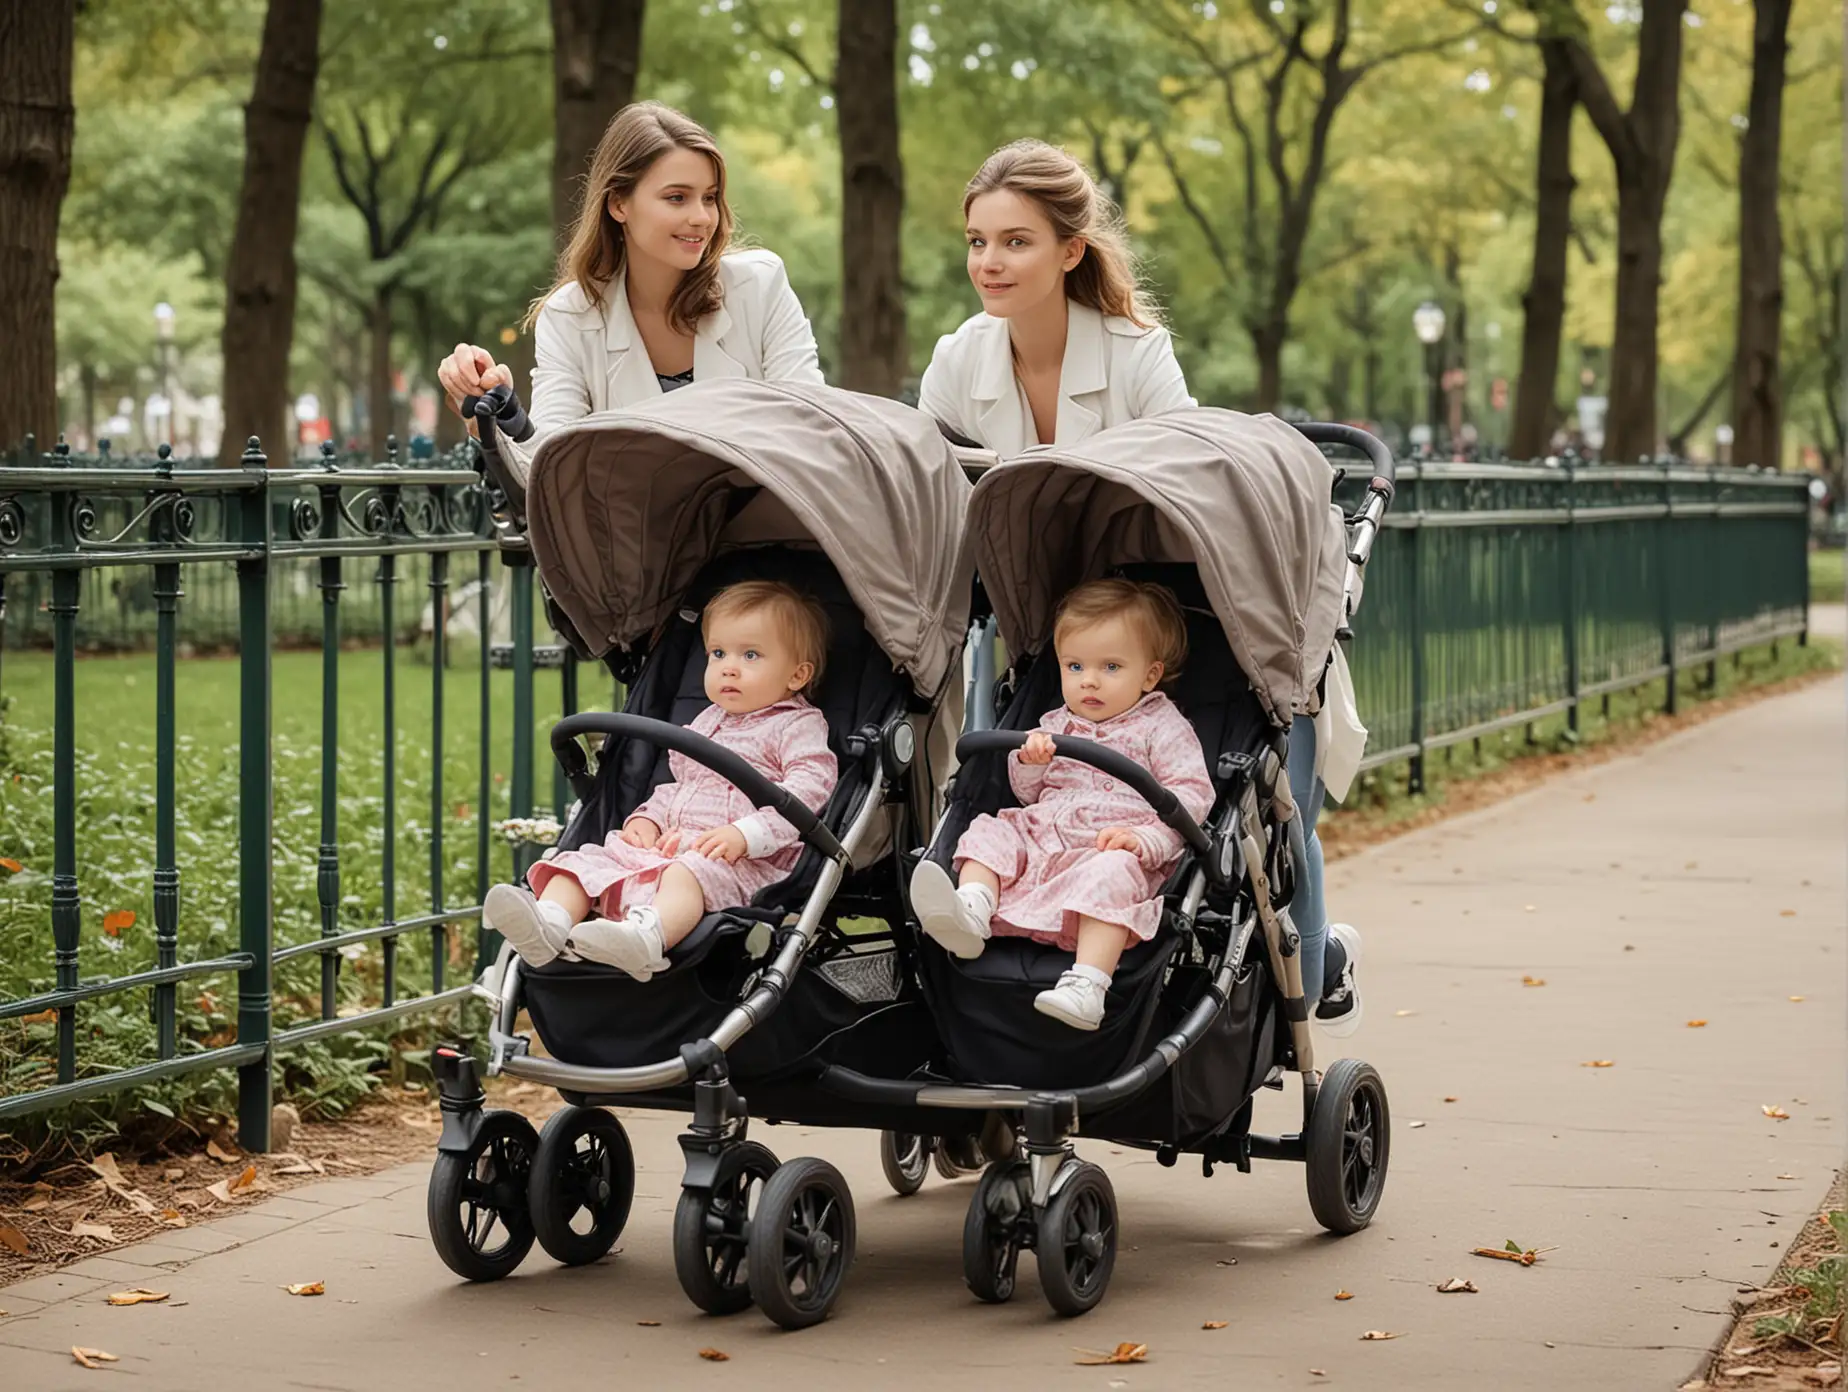 Mother with Twin Babies in Park Realistic Photograph